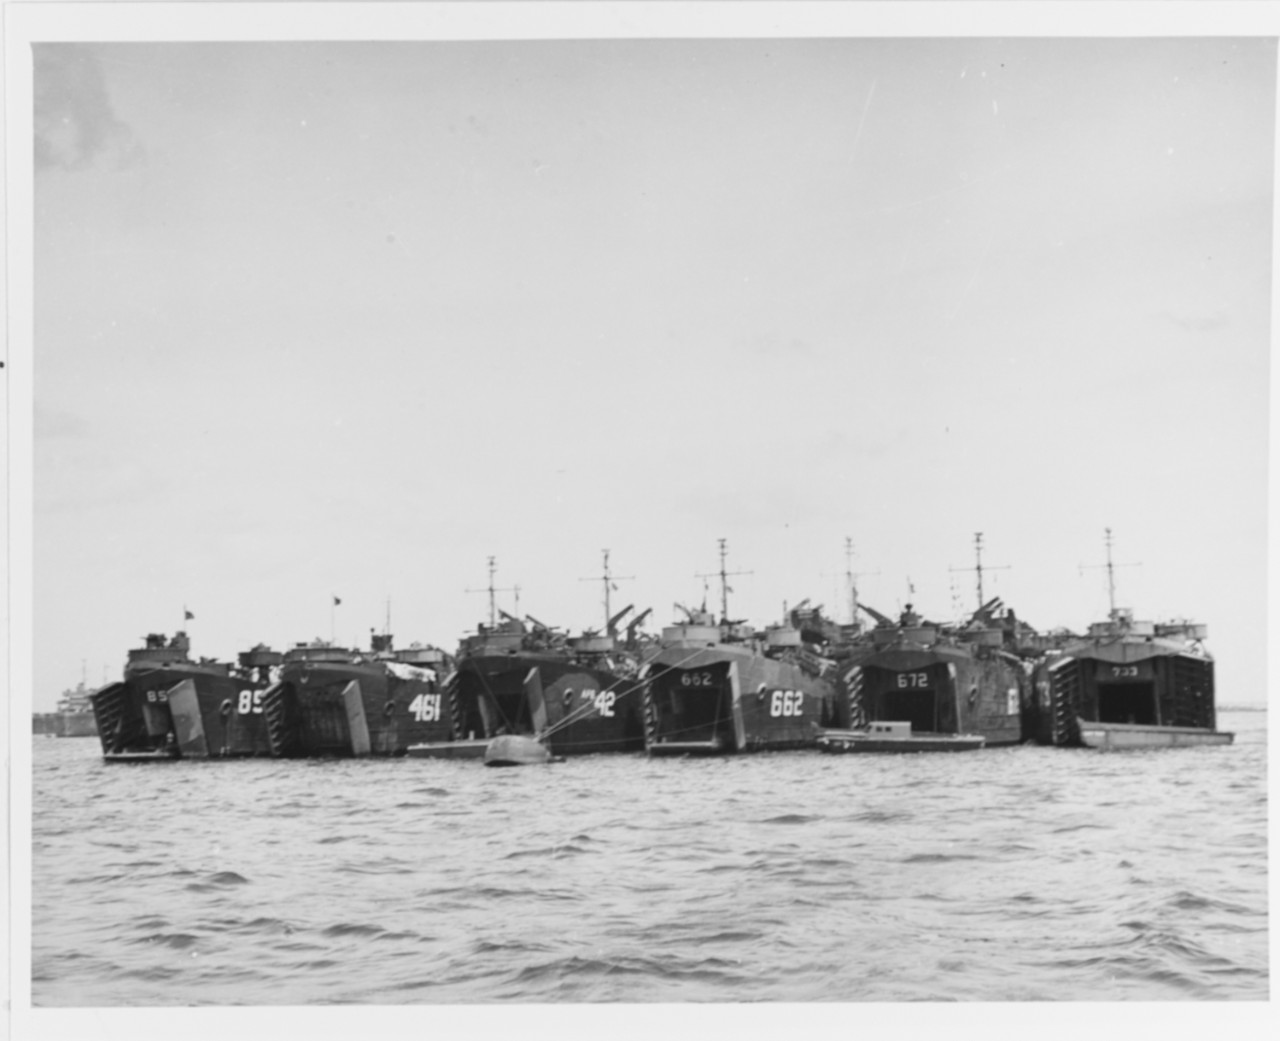 Photo #: 80-G-350133  Tank Landing Ships (LST) and a Barracks Ship (APB) moored together, 1945.